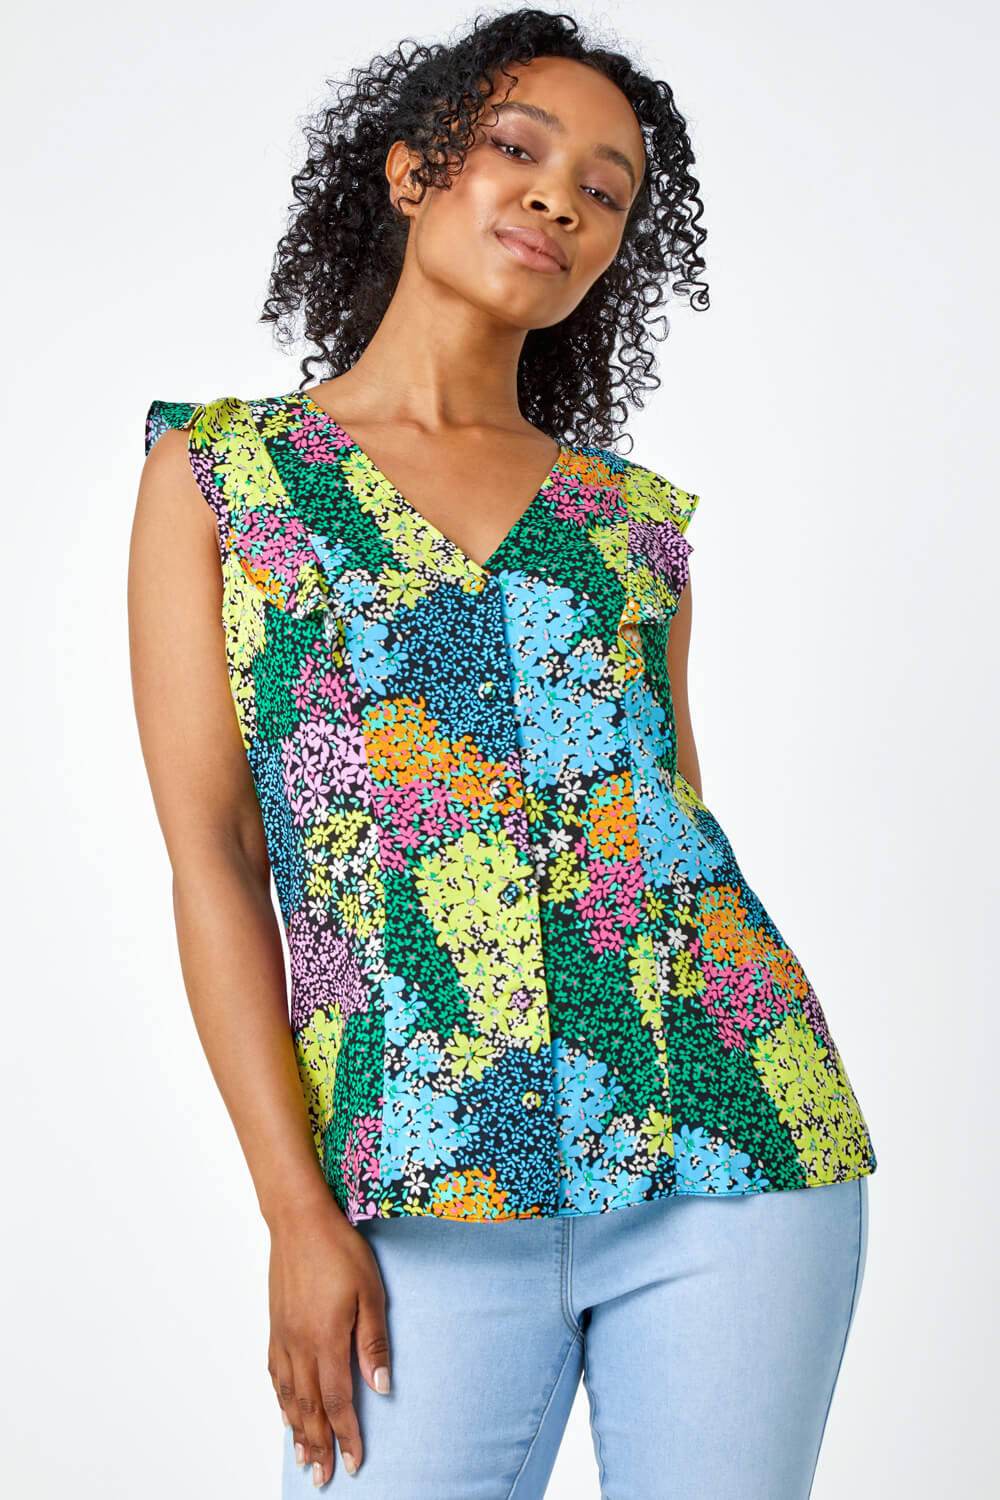 Black Petite Floral Frill Detail Button Top, Image 2 of 6